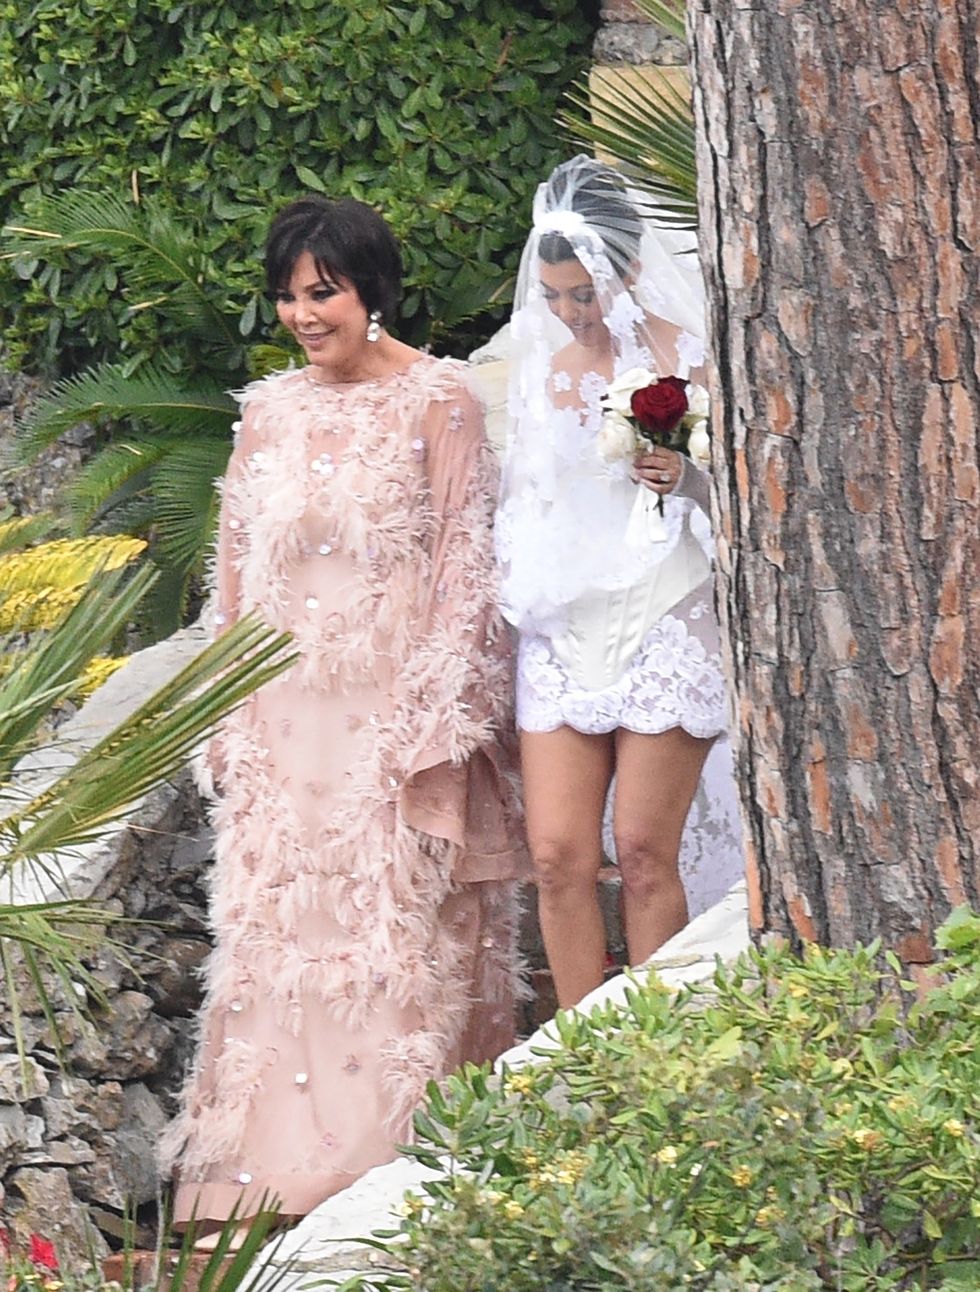 With her floral dress, Kylie Jenner found the perfect wedding guest outfit  for Kourtney Kardashian and Travis Barker's wedding